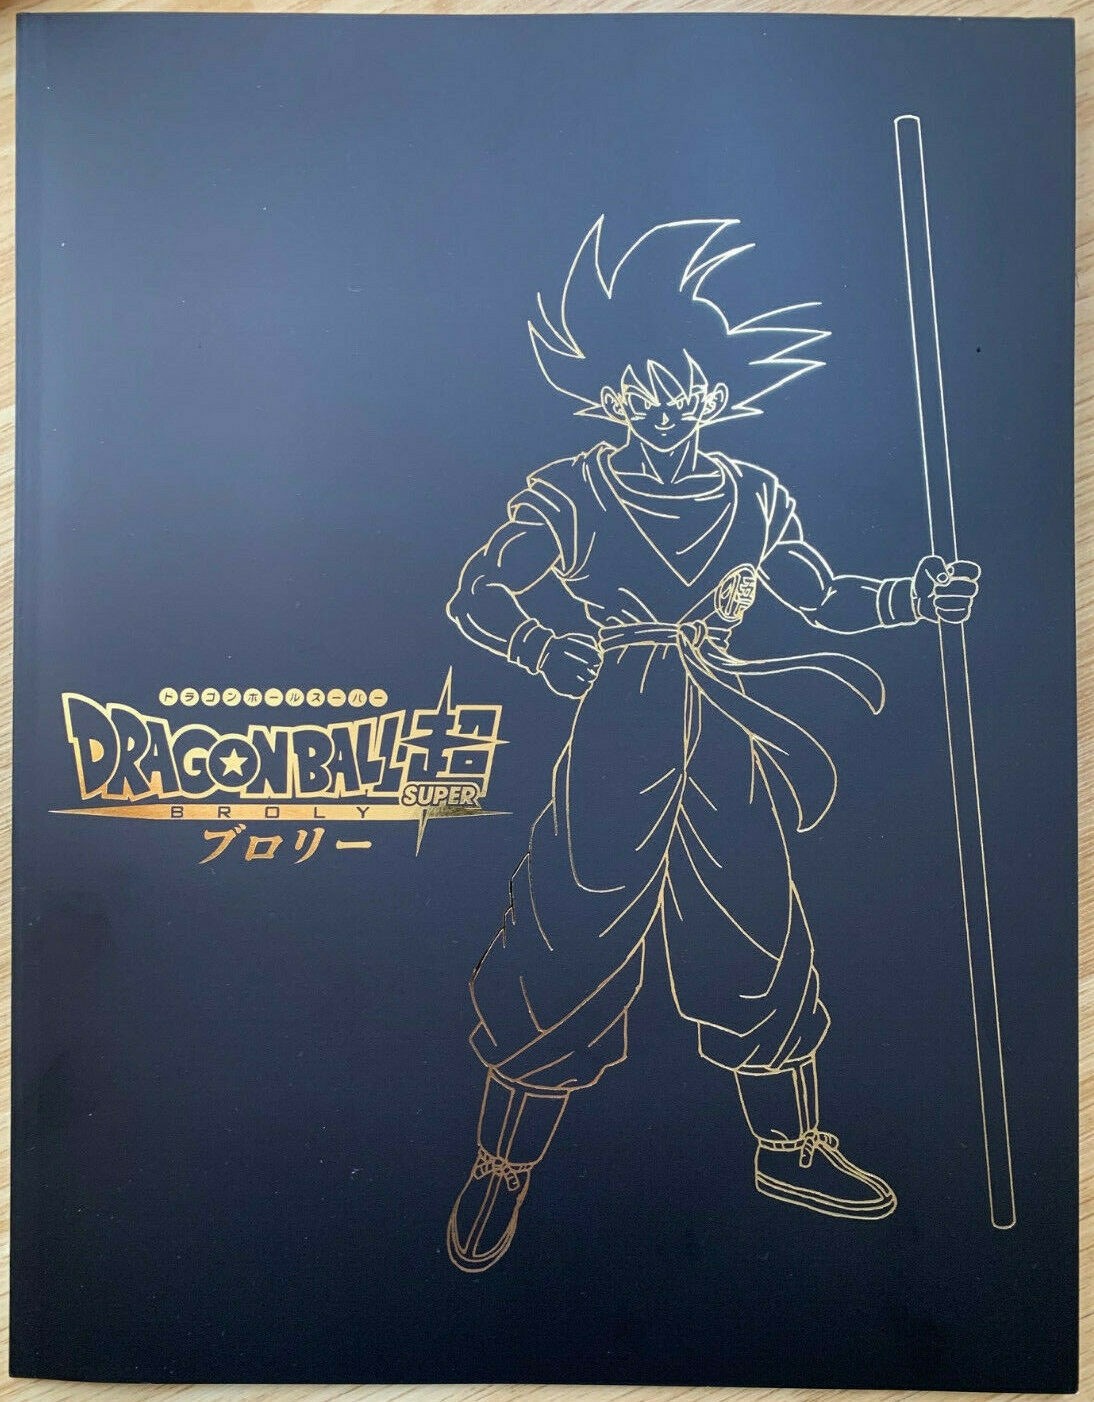 Dragon Ball Super, BROLY Movie 2018 Pamphlet Brochure Special ver. (Japanese Import)